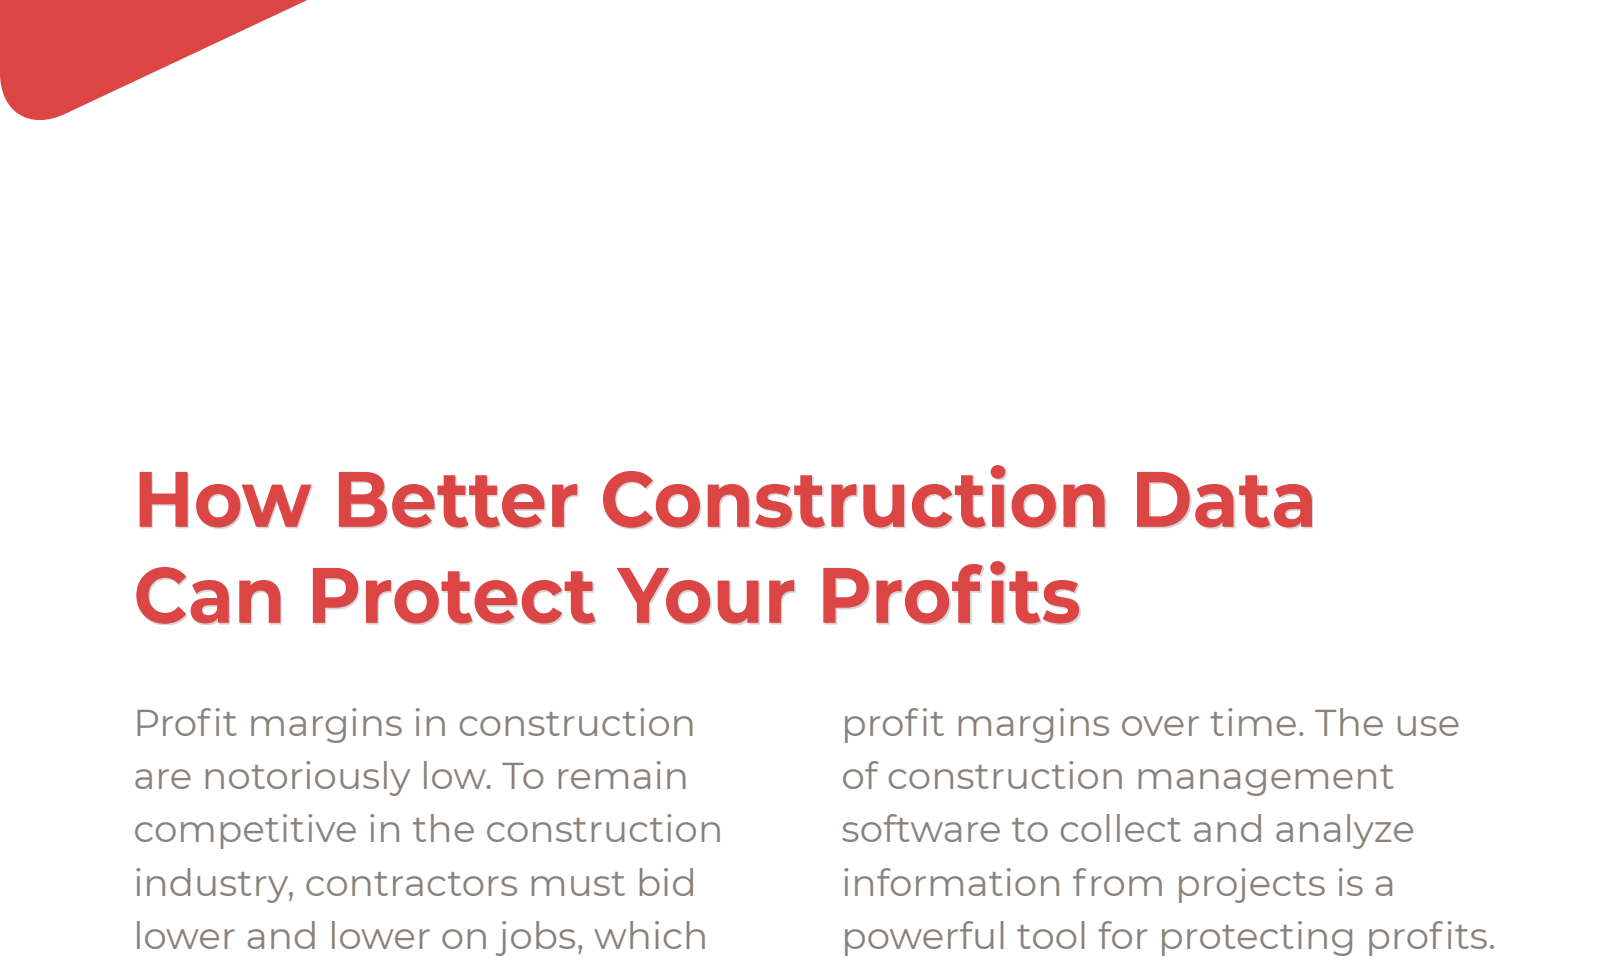 Maximize profits with accurate construction data, ensuring cost-effective decision-making and risk mitigation.